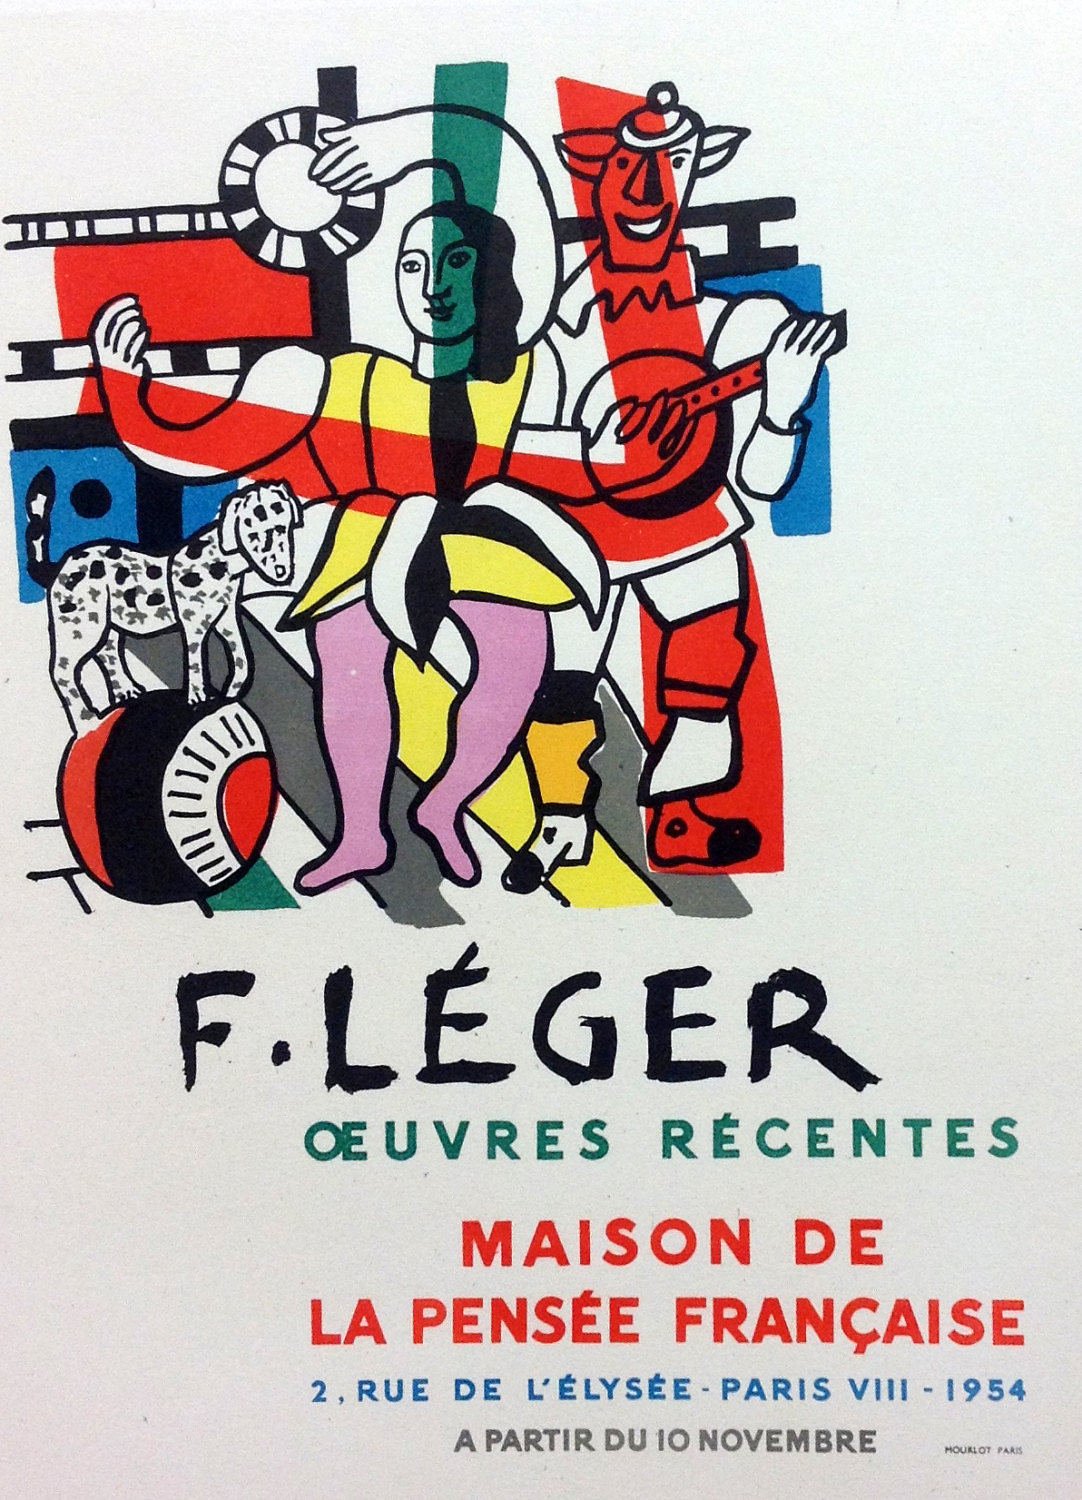 Leger Lithograph 37, Oeuvres recentes, 1959